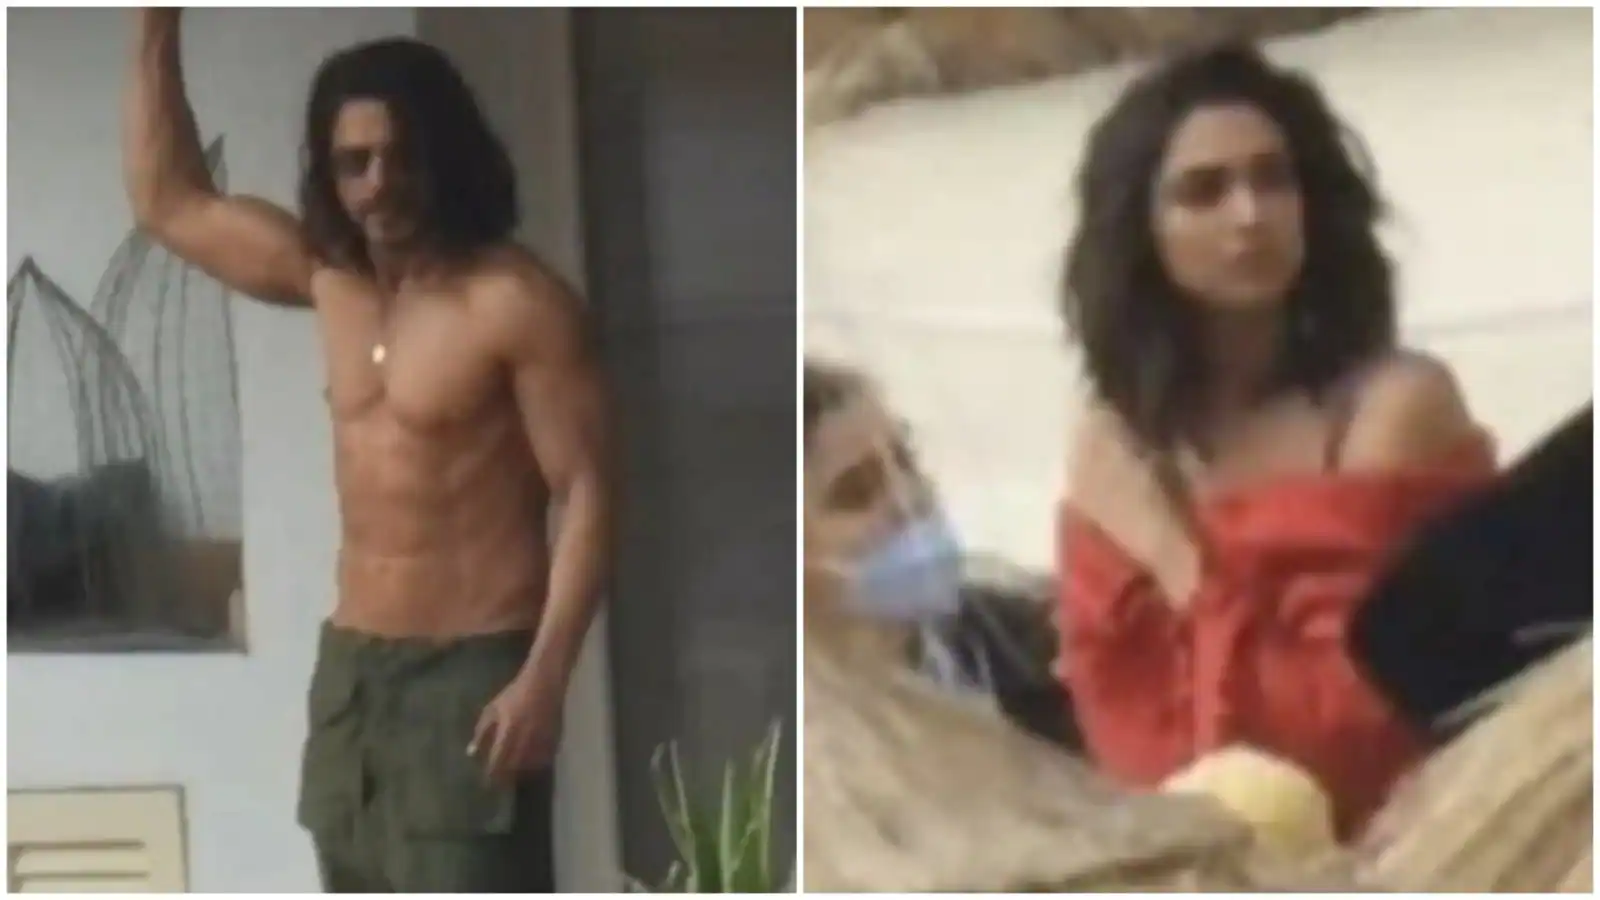 Shah Rukh Khan’s drastic transformation seen in leaked pictures from Pathaan sets in Spain; fans marvel at his 8-packs